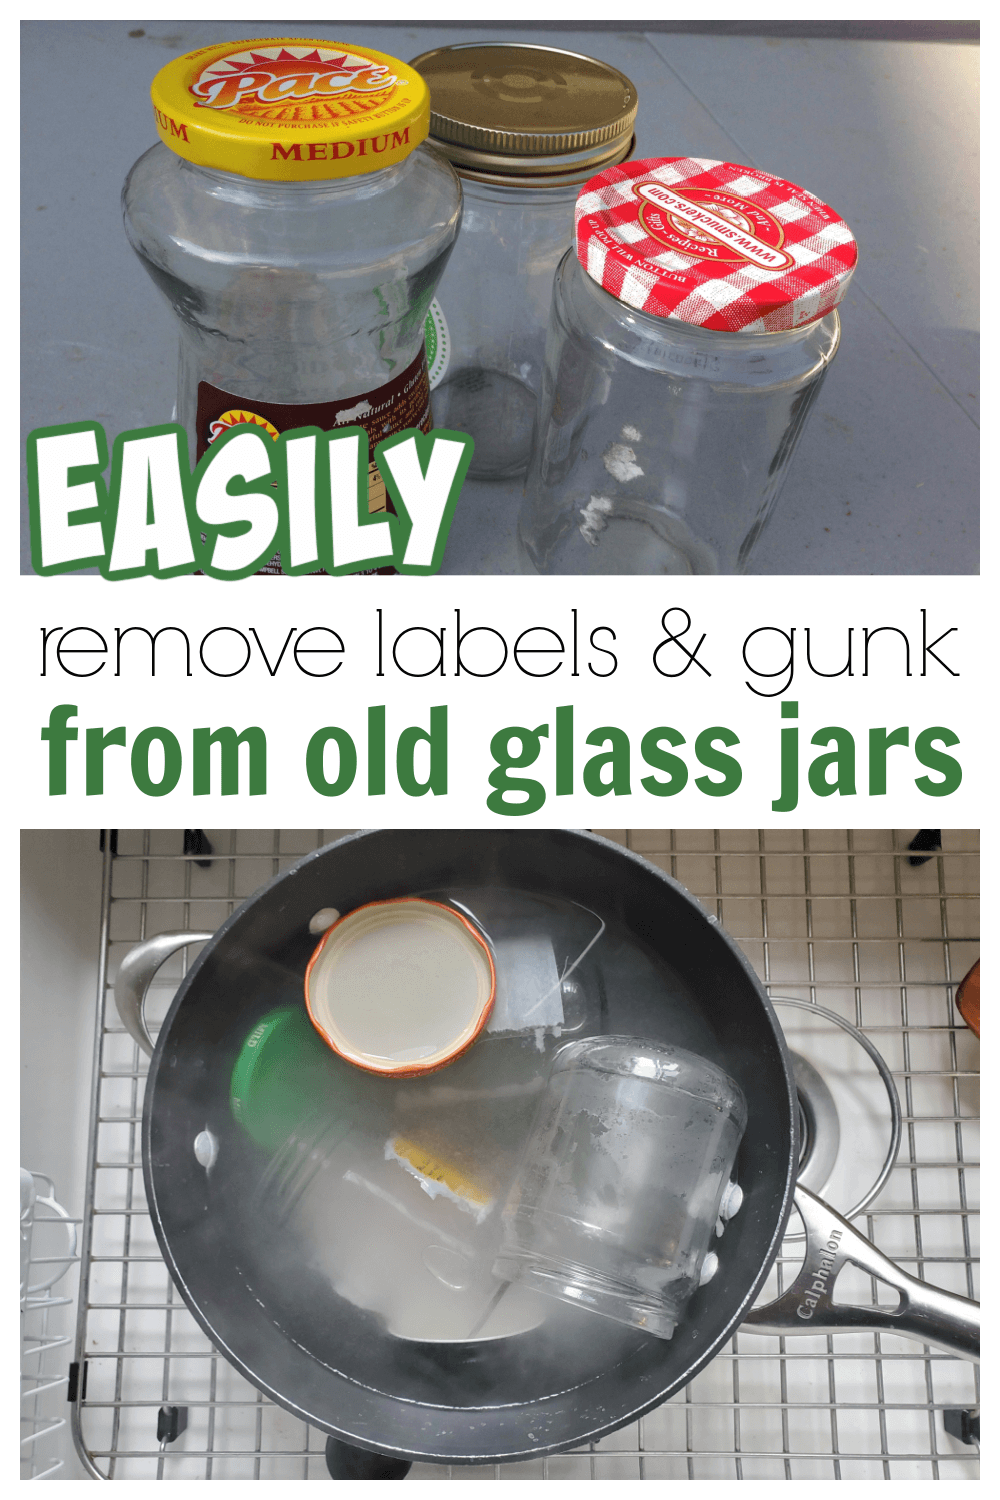 https://refreshliving.us/wp-content/uploads/2017/02/easy-way-to-remove-labels-from-glass-jars-1-1.png